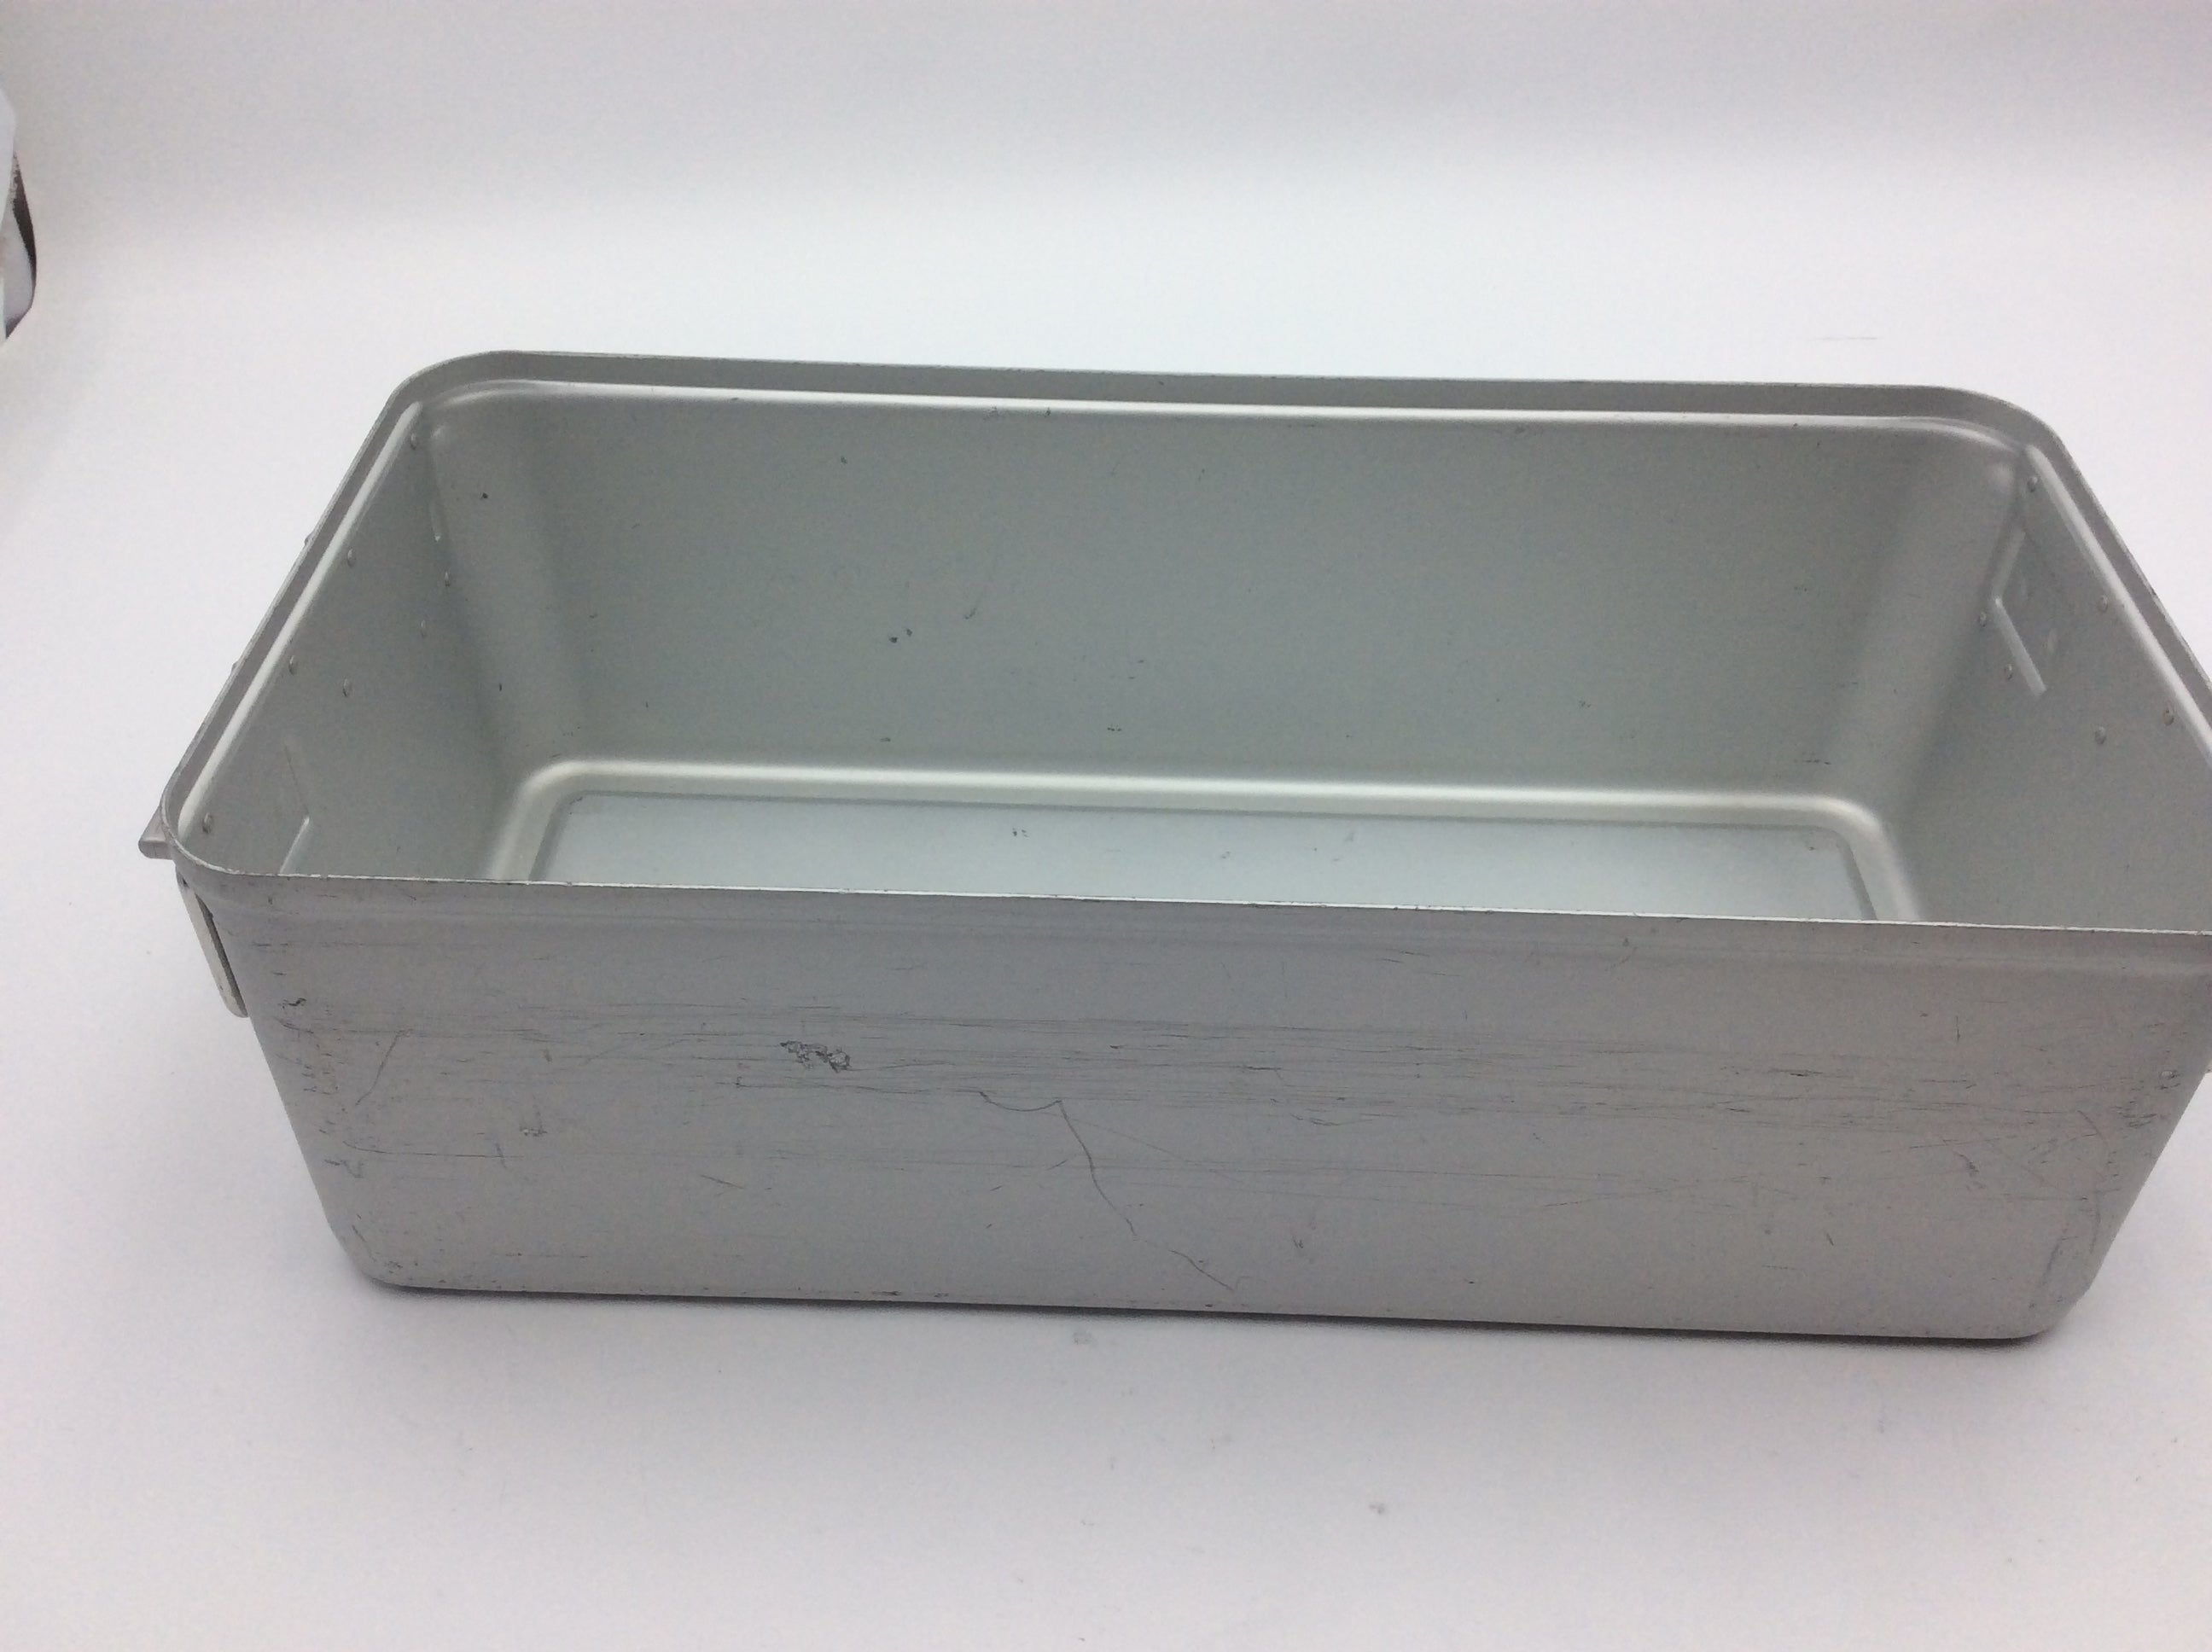 Load image into Gallery viewer, A Biomedical Service Aesculap 78532 Aluminum Sterilization Case Tray Container Jk44 150.00